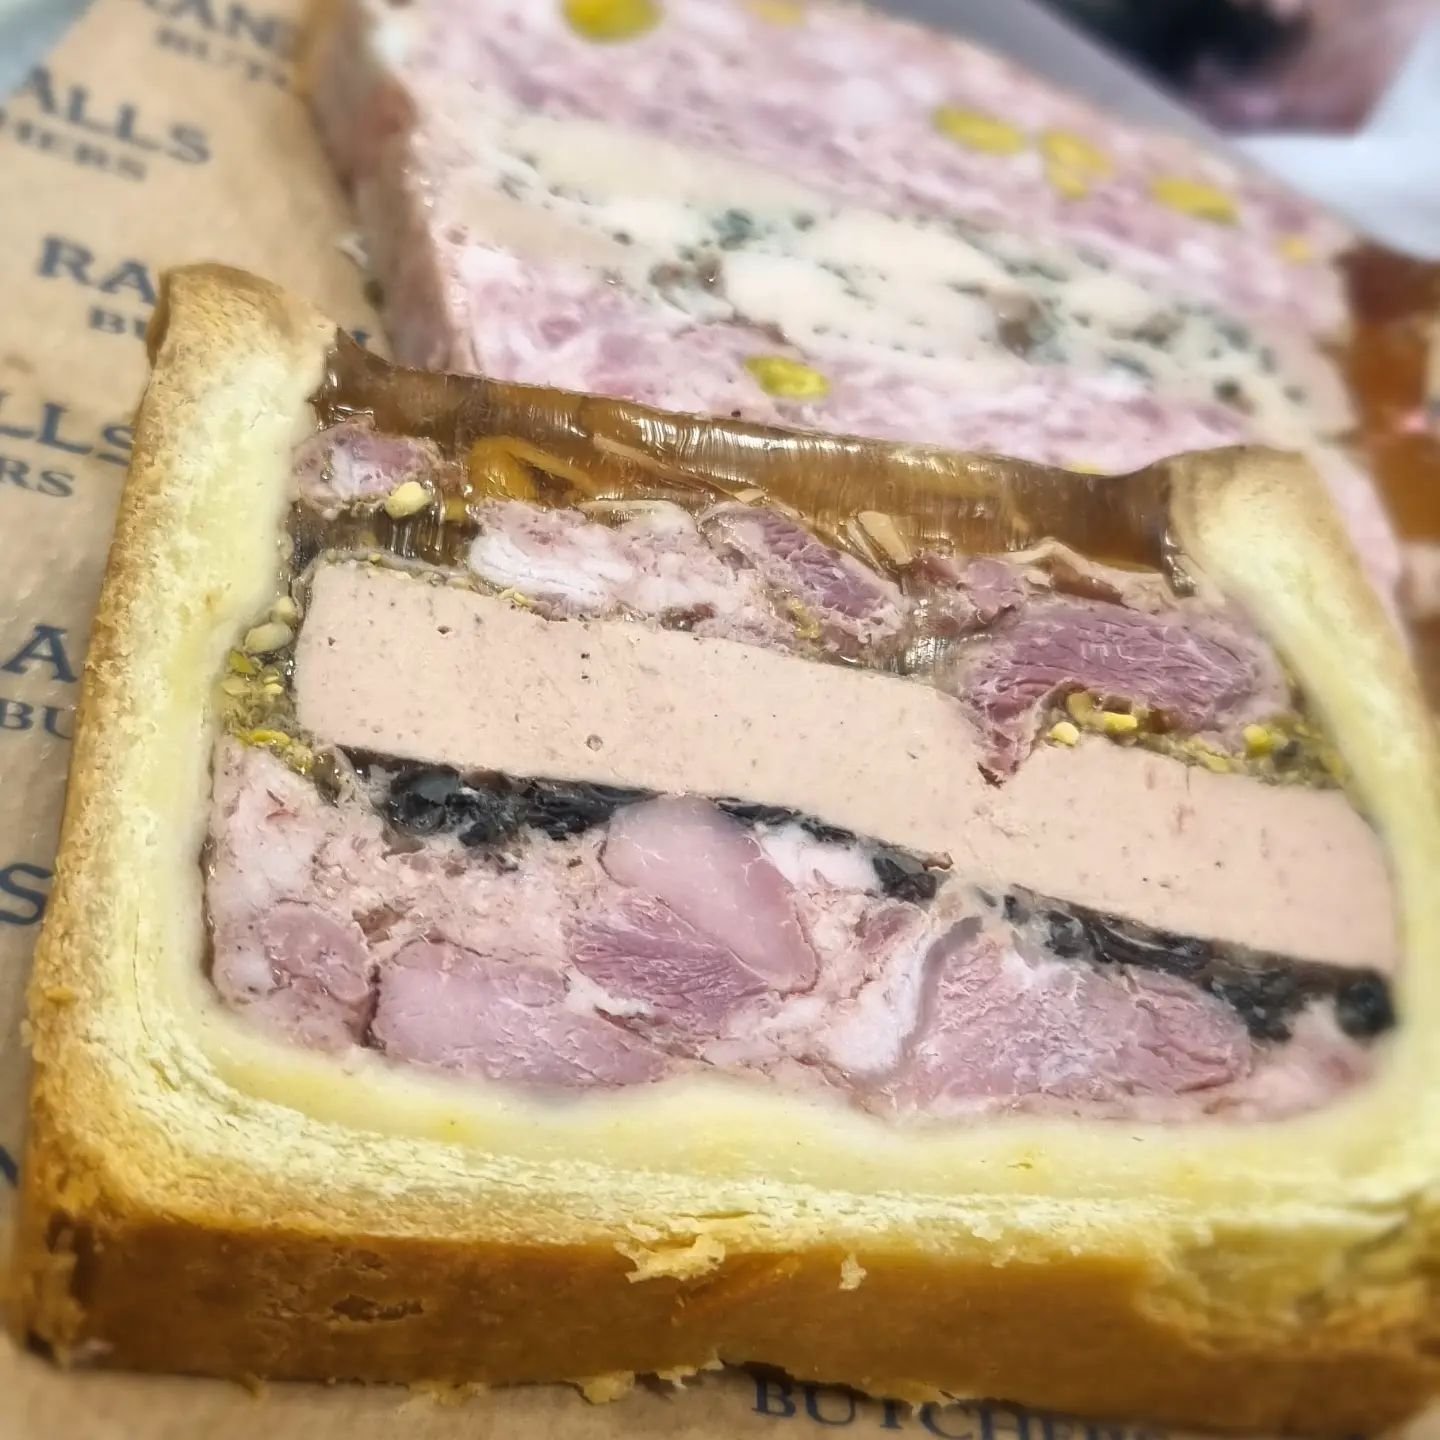 We have some new P&acirc;t&eacute;s in... The en croute has fois gras, pork cheek, duck breast with pistachio and forest mushroom. The other one here has pork, chicken, tarragon and pistachio. They are SO good. #randallsbutchers #wandsworthbridgeroad